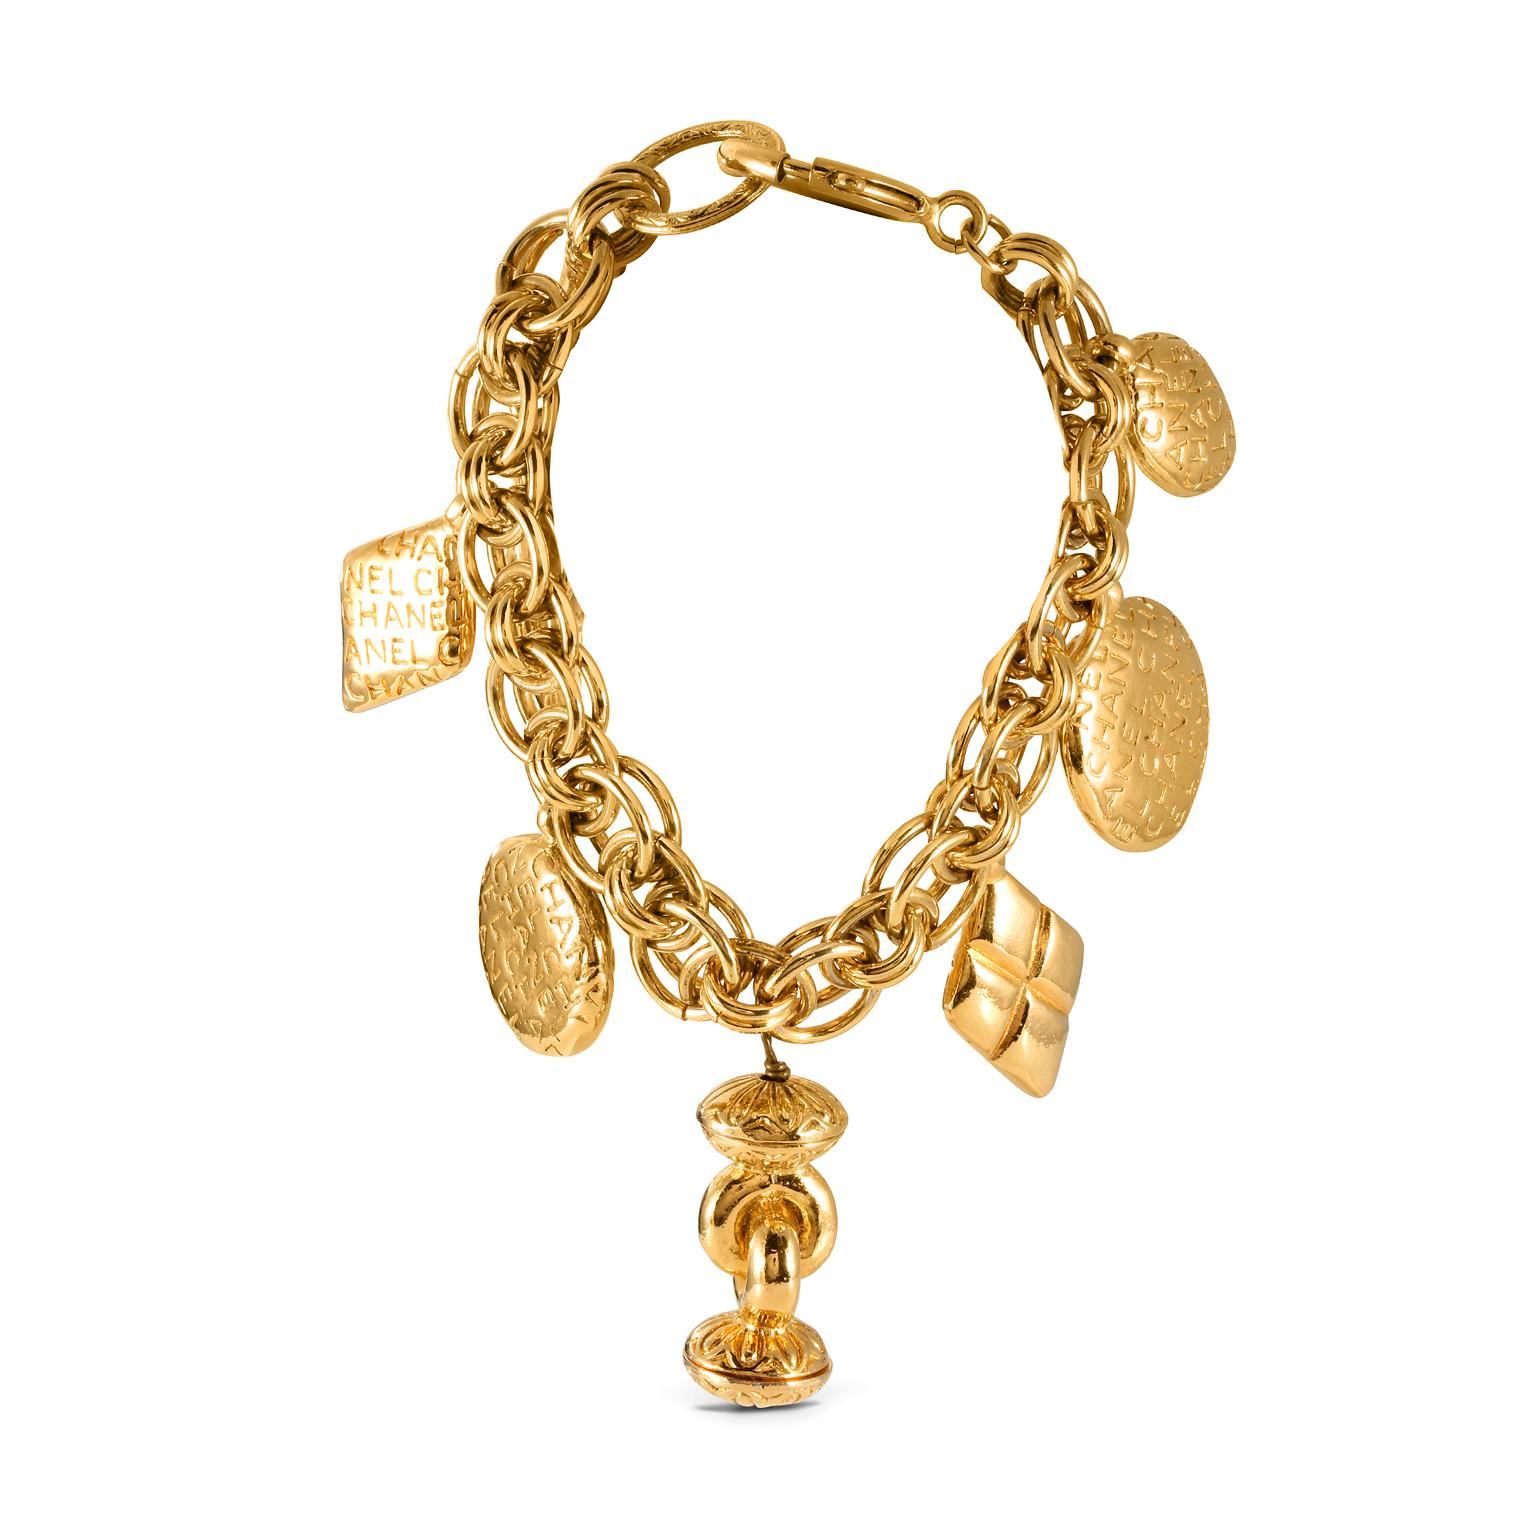 This authentic Chanel Gold Charm Bracelet is in excellent vintage condition.  CHANEL engraved gold tone charms dangle from a gold tone link bracelet.    Pouch or box included.
ACO 11032


